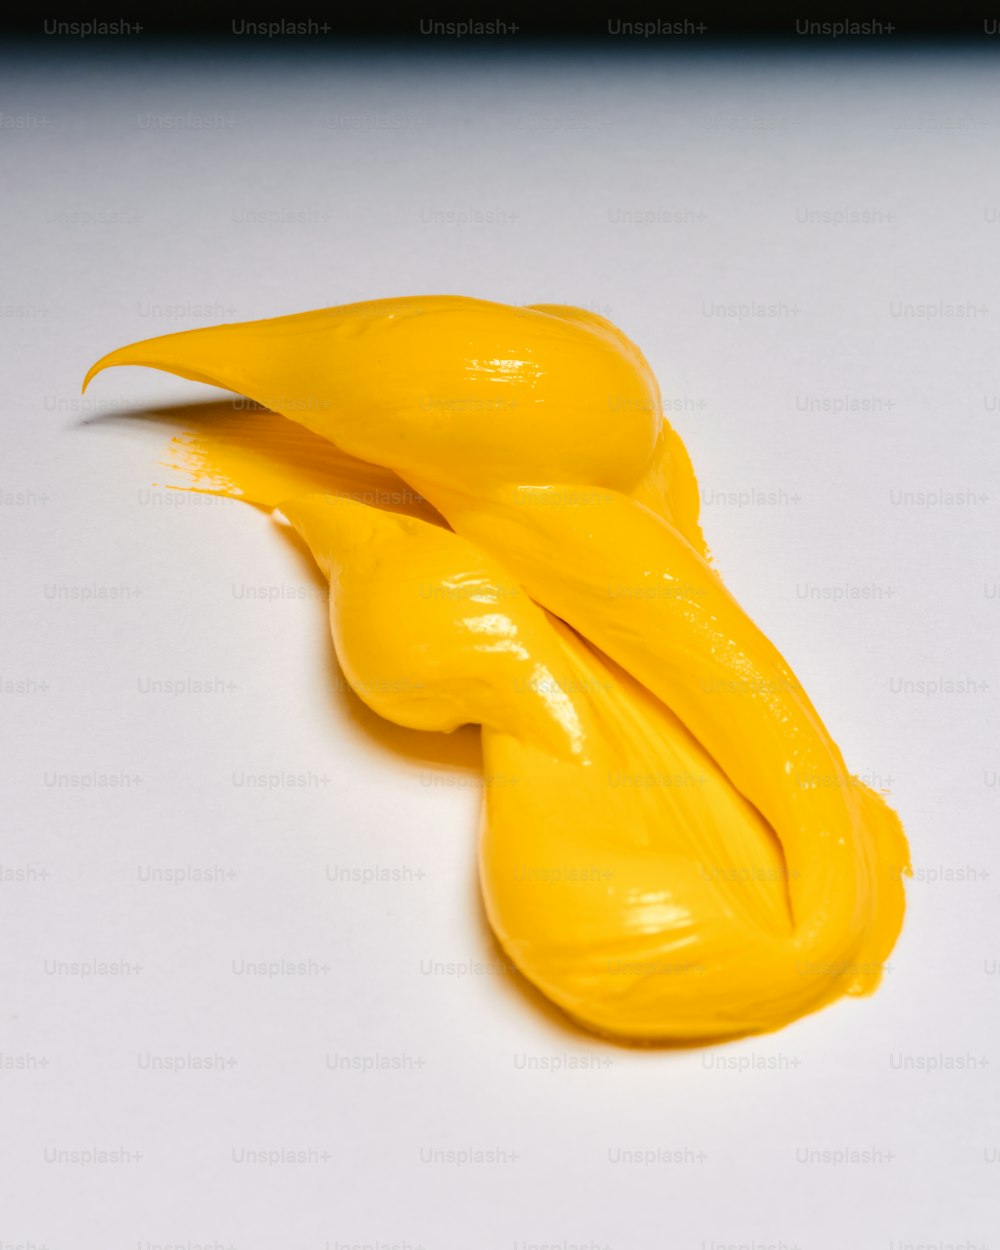 a close up of a yellow substance on a white surface